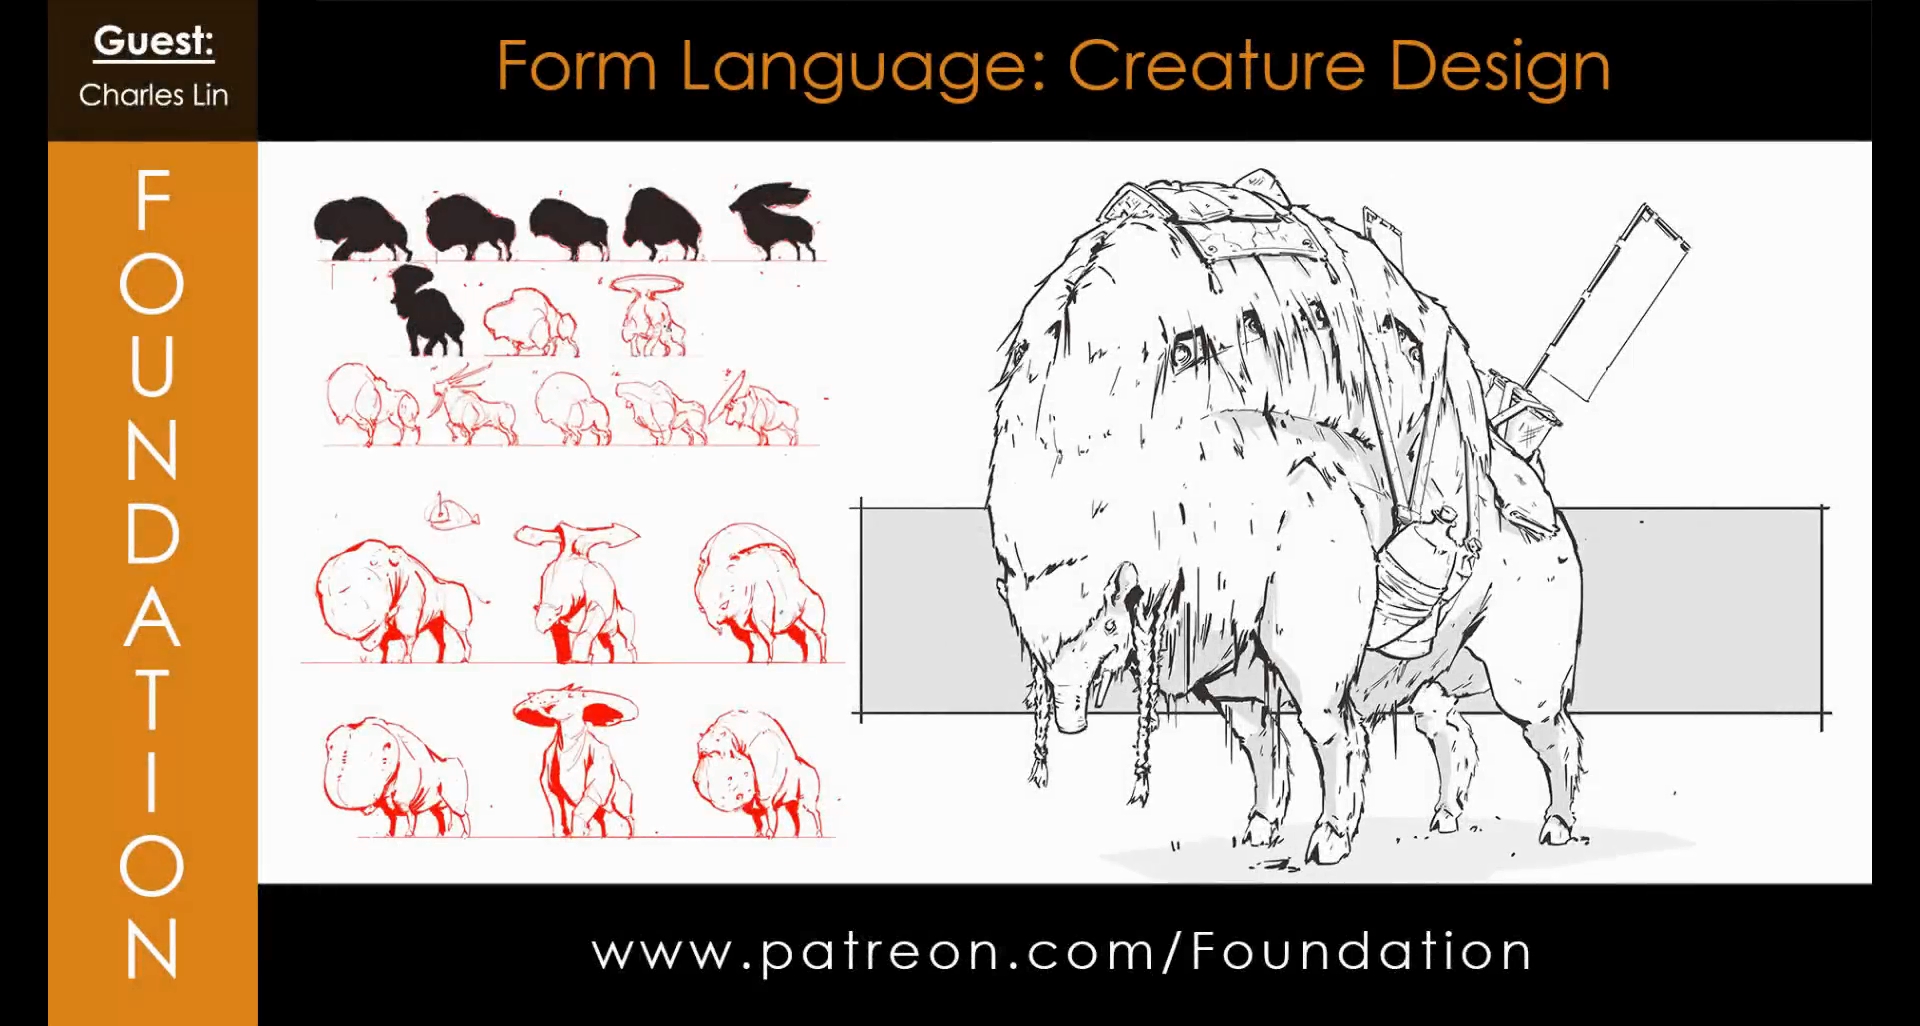 Foundation Patreon – Form Language Creature Design with Charles Lin